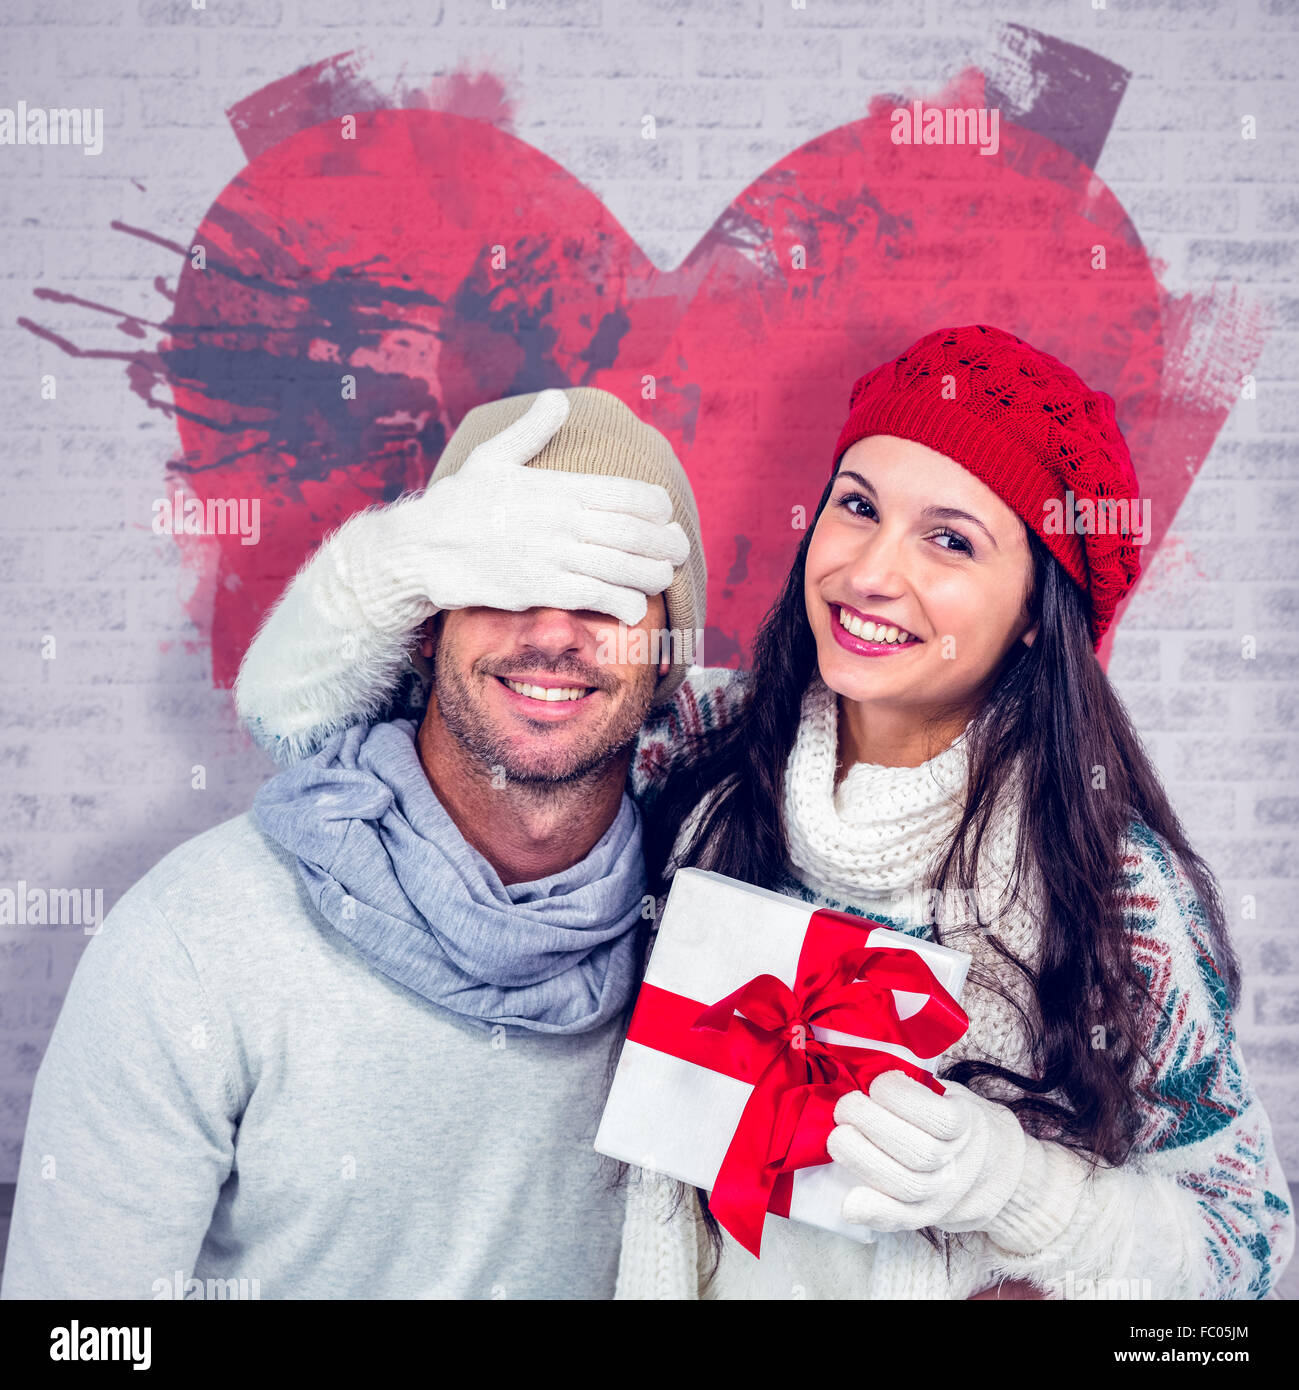 Composite image of smiling woman covering partners eyes and holding gift Stock Photo